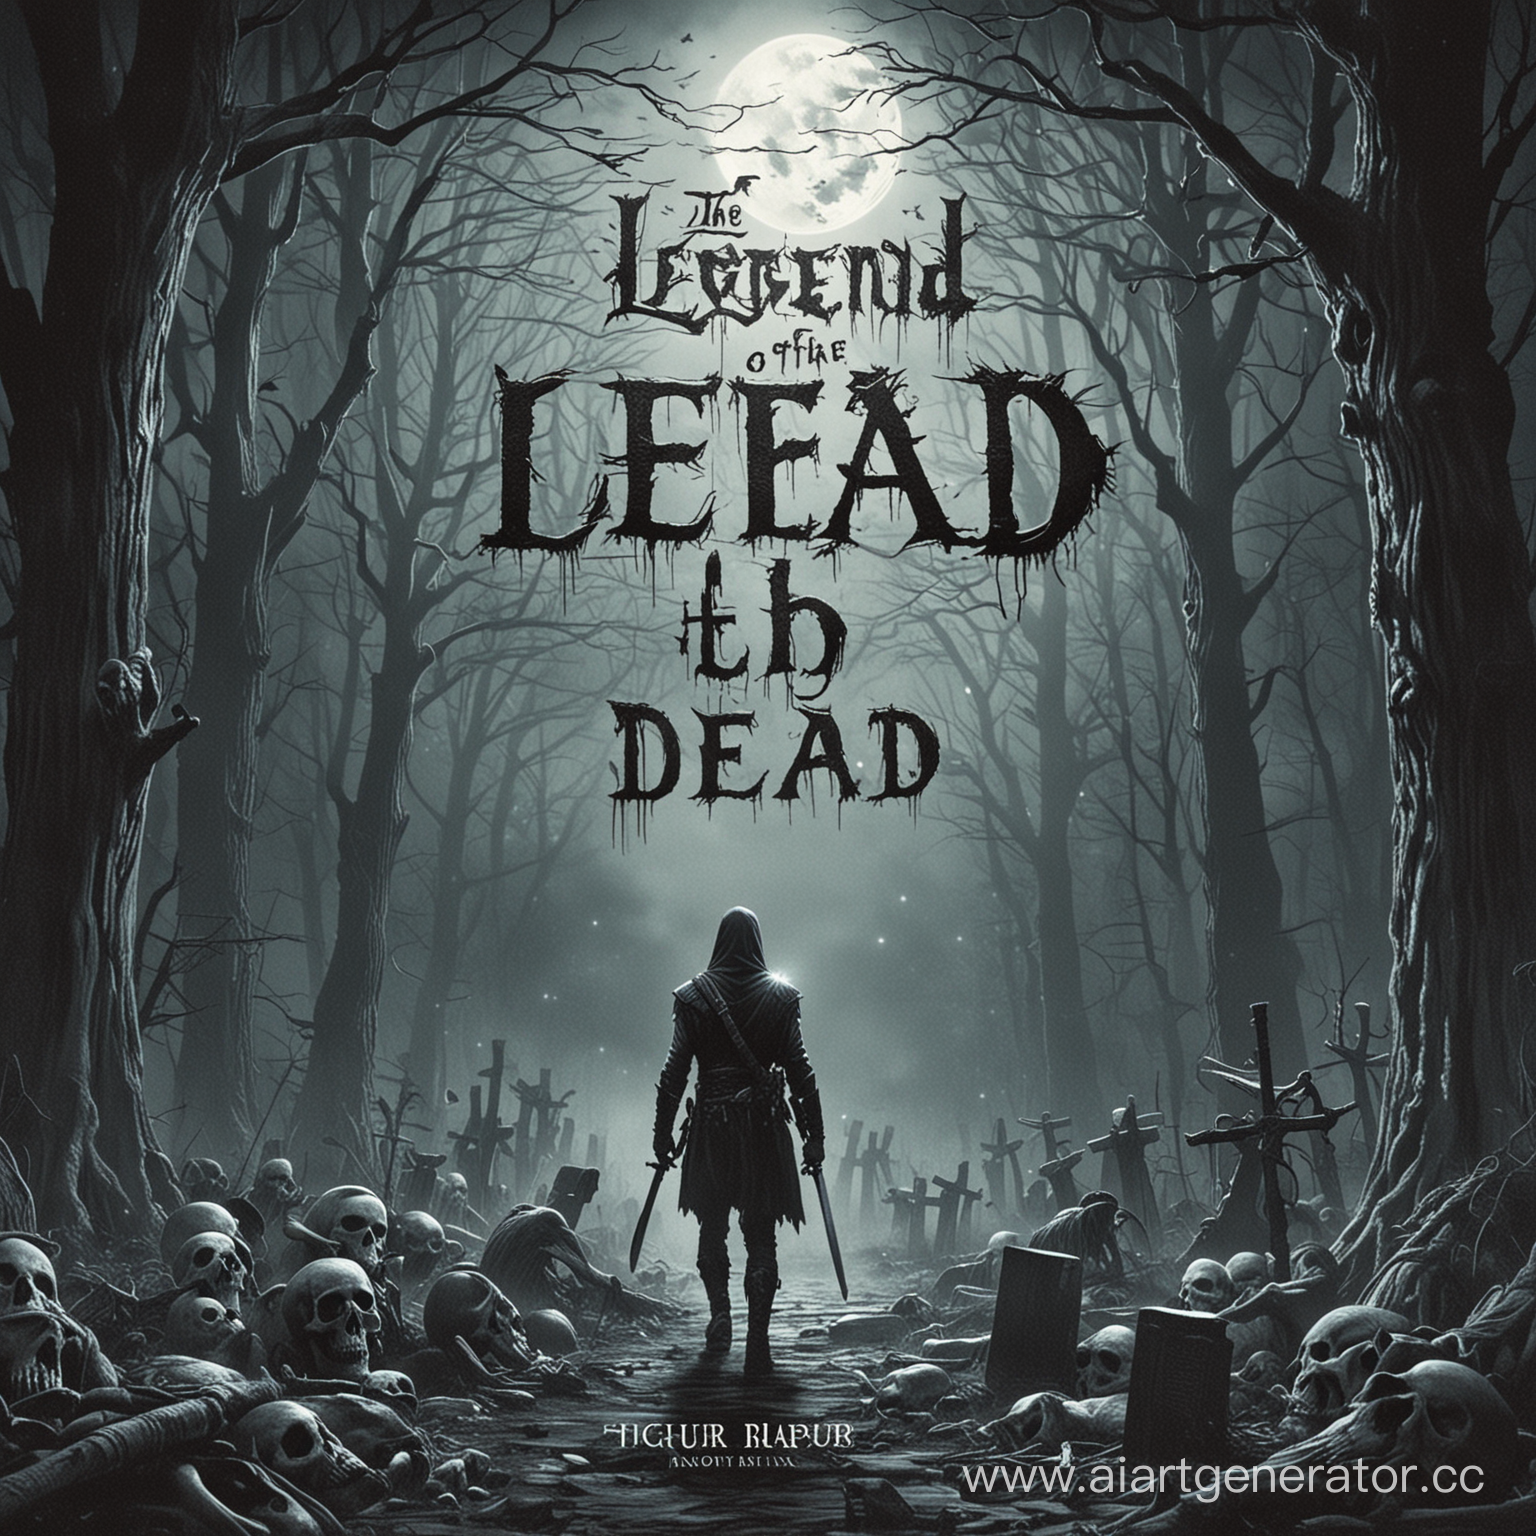 The Legend of the Dead